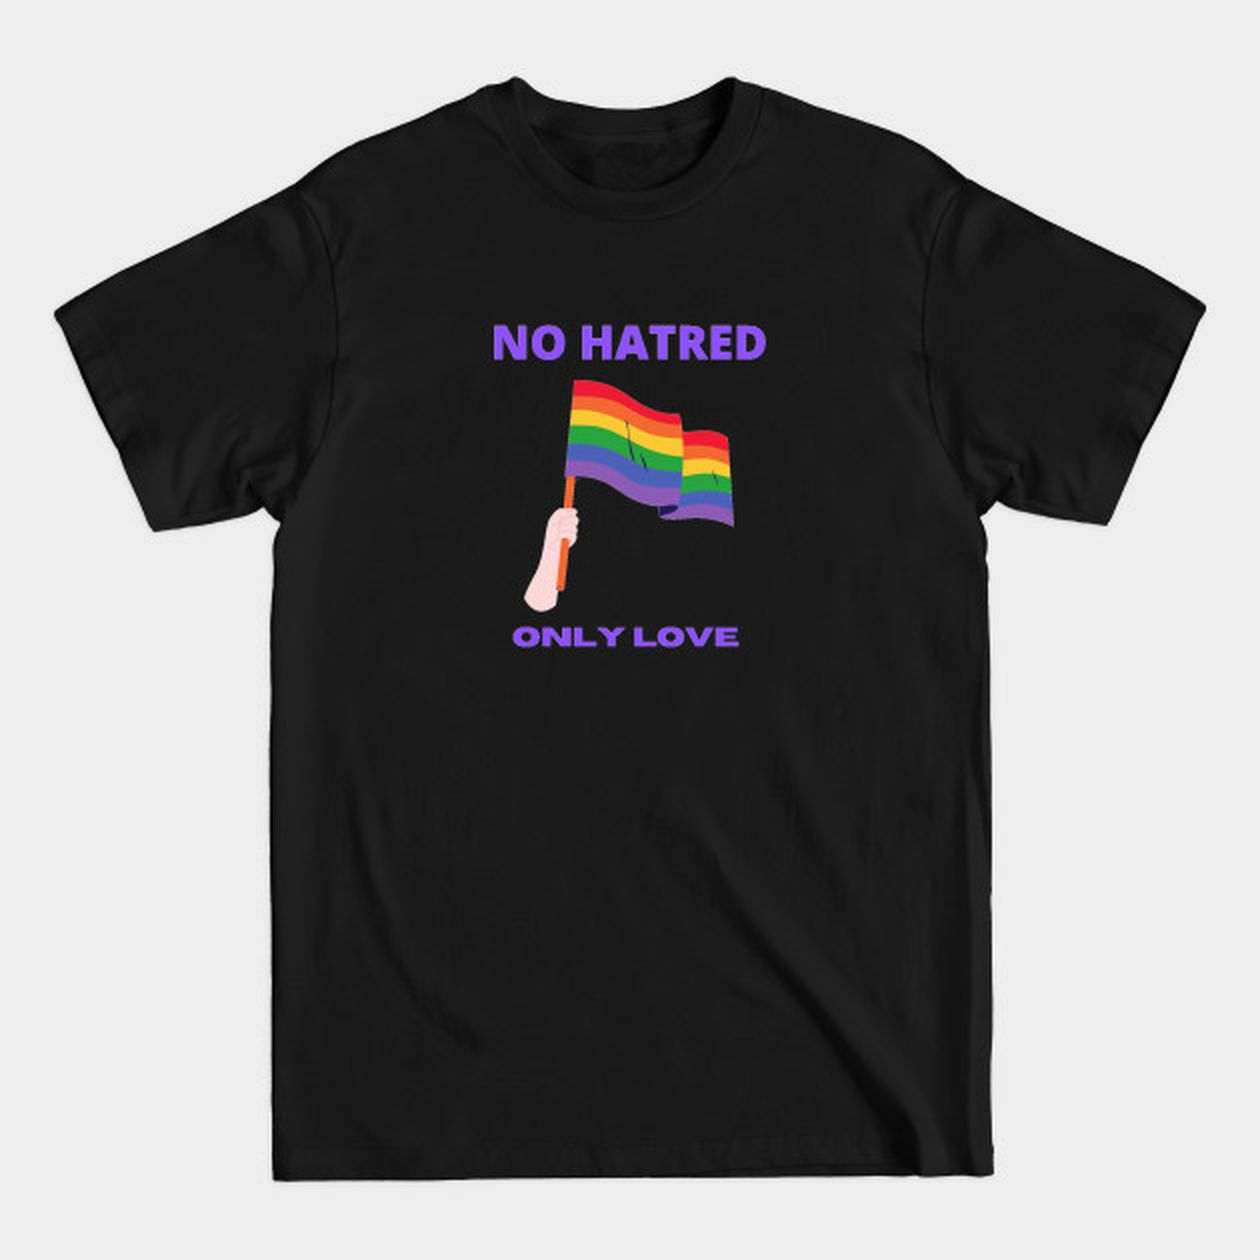 LGBTQ T Shirt/ No Hate/ Only Love T Shirt For Pride Month/ T Shirt For LGBT